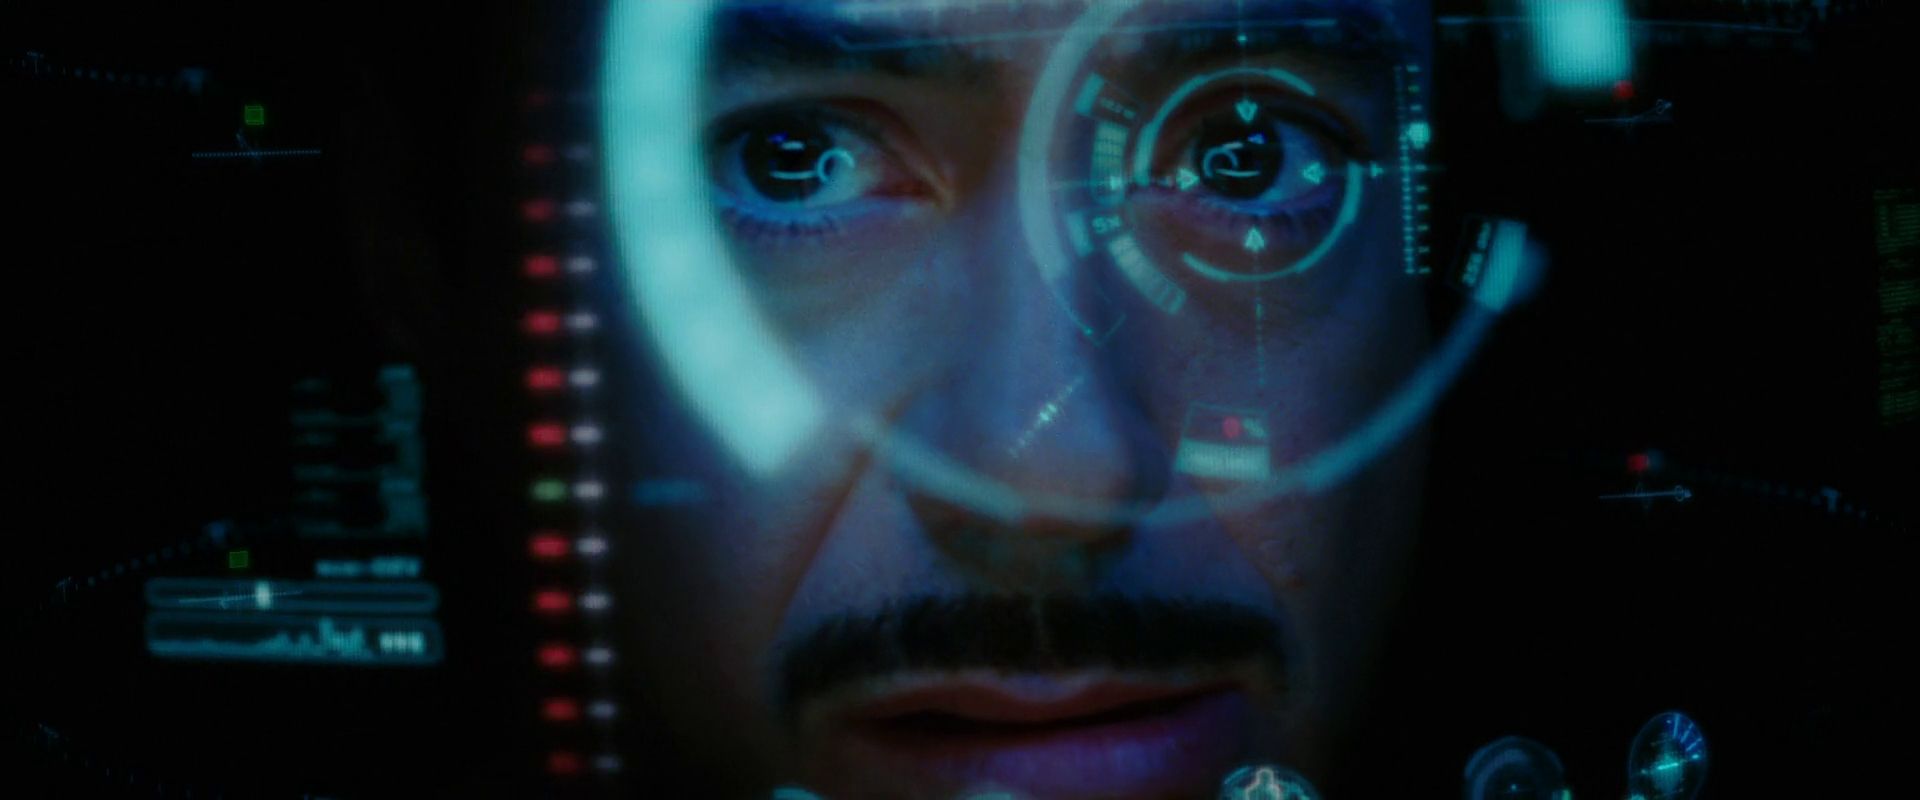 A close up of Tony Stark’s face within the Iron Man suit through the HUD.